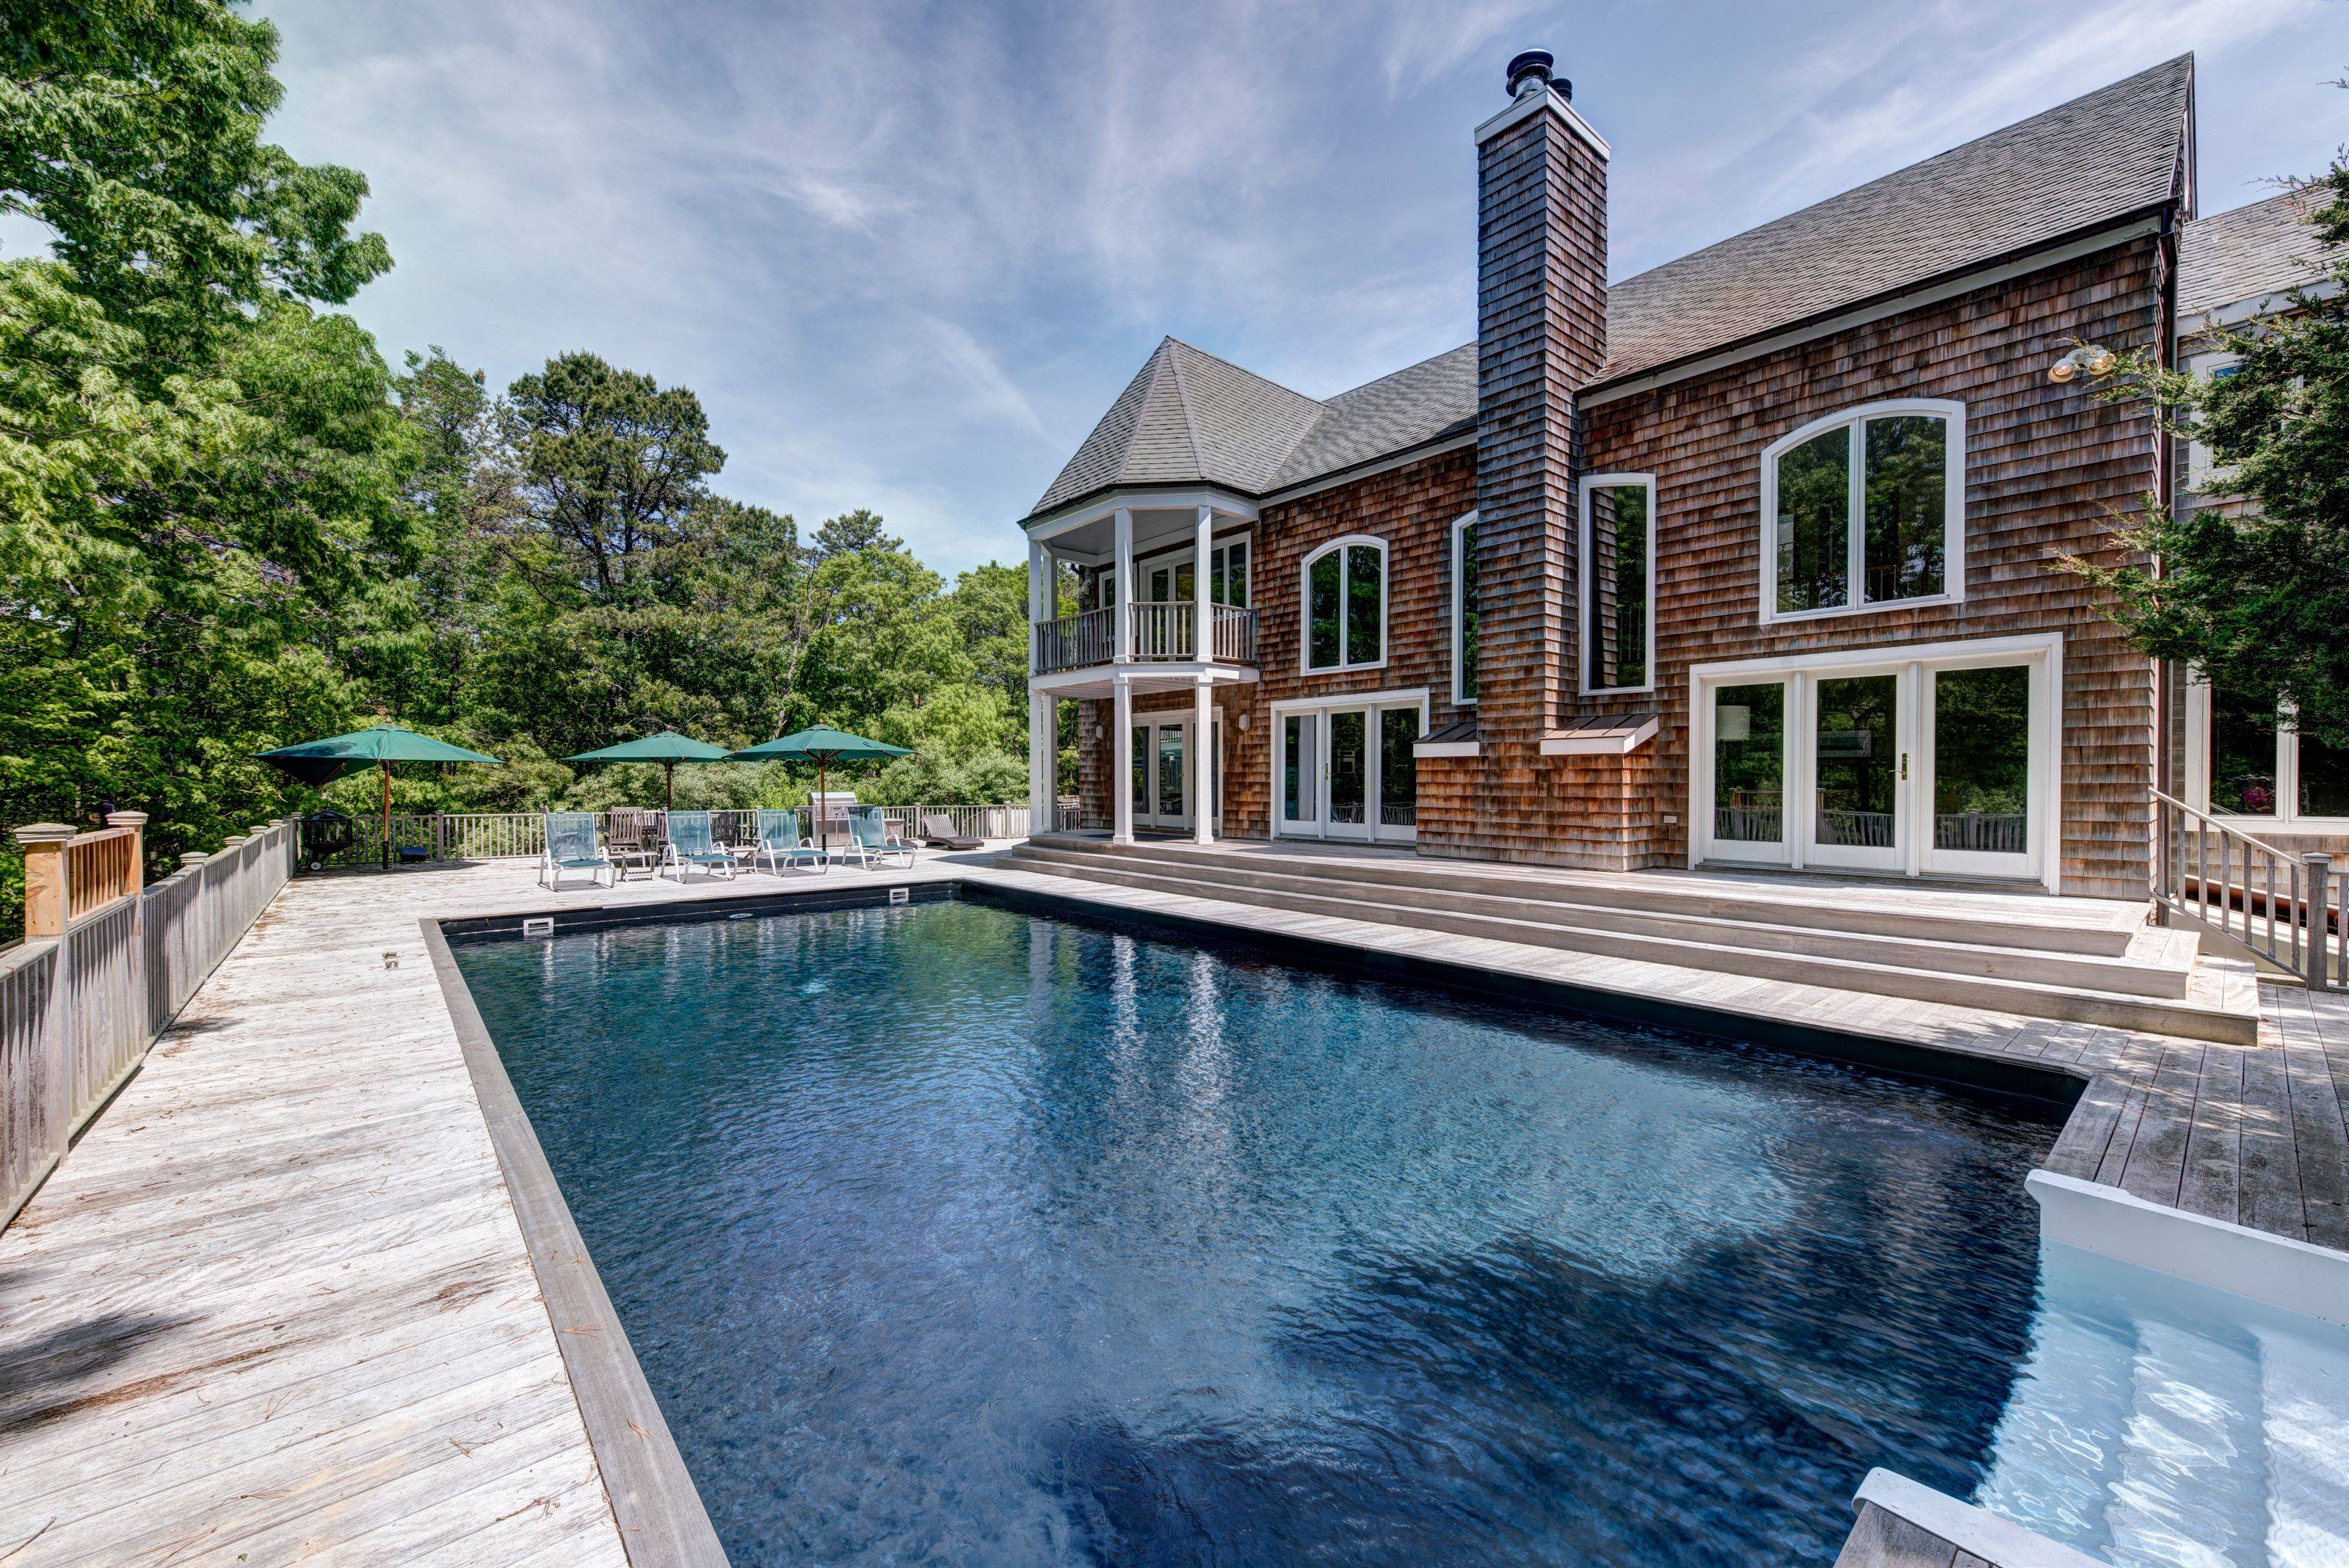 8 Bedroom Water Mill Estate With Pool and Tennis